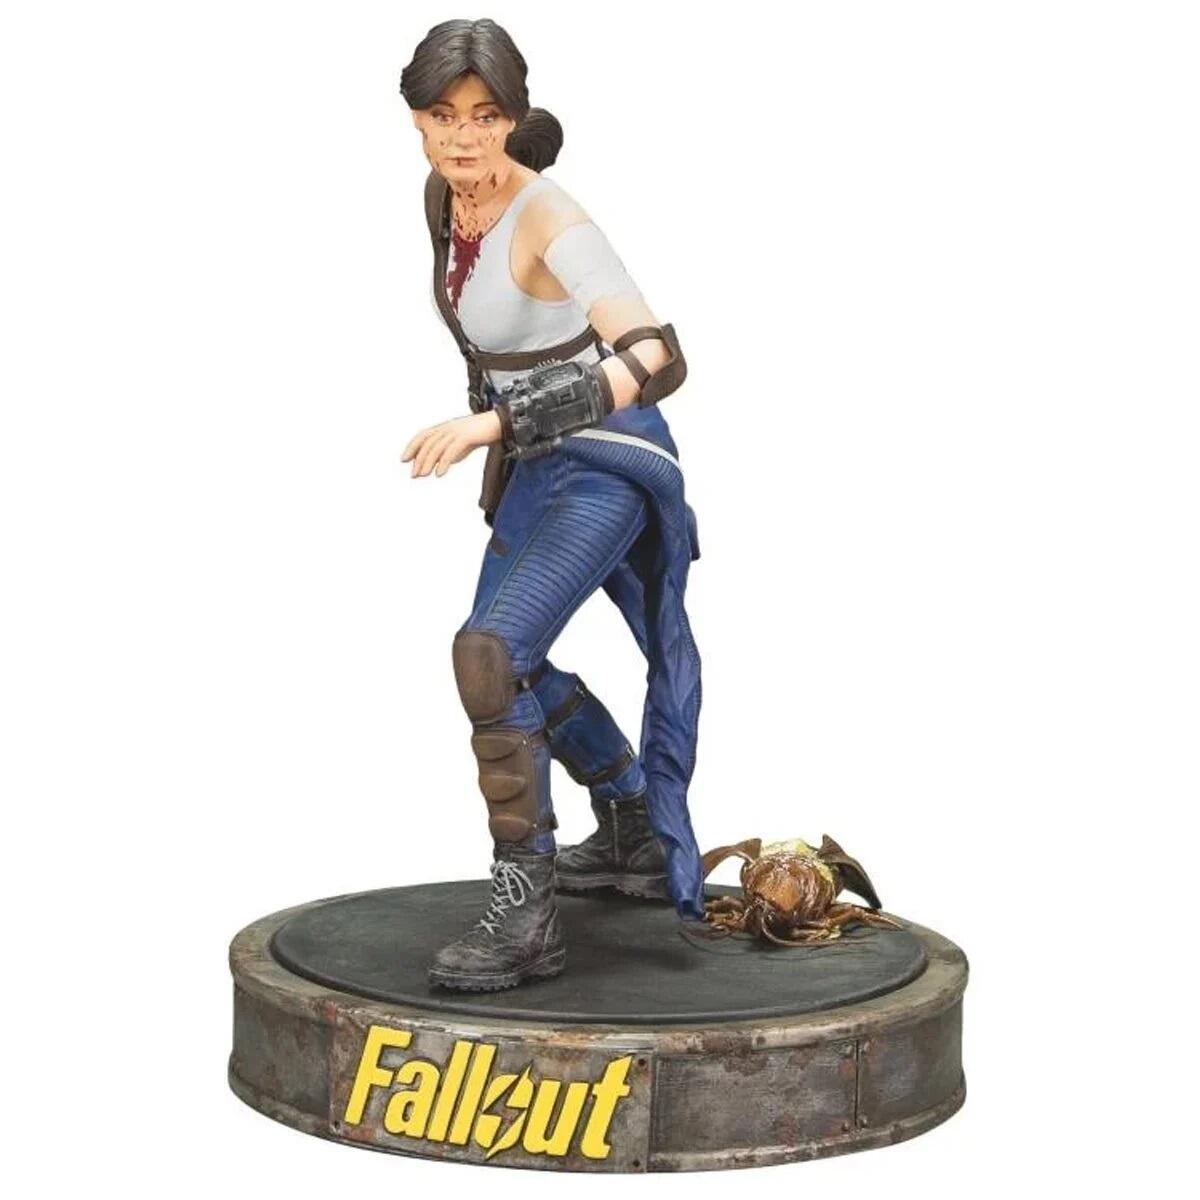 Fallout Lucy (Amazon Show Version) Deluxe 7.5 Inch Figure